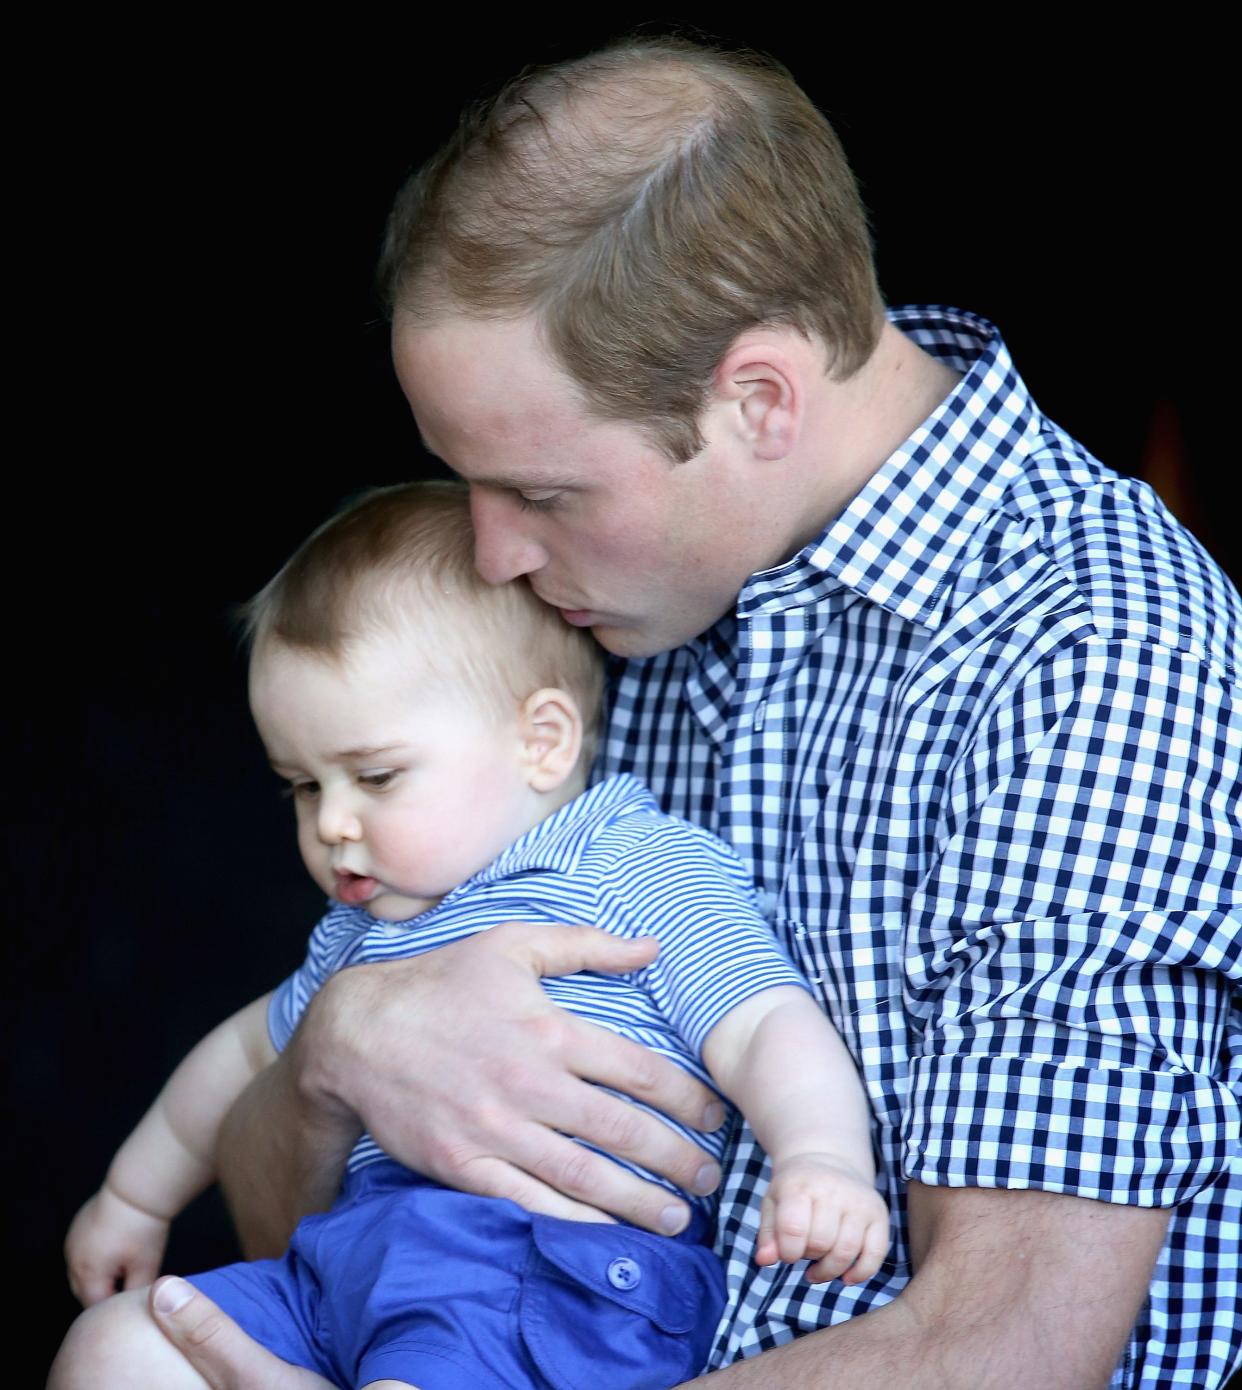 Prince William kisses Prince George at Taronga Zoo on April 20, 2014 in Sydney.